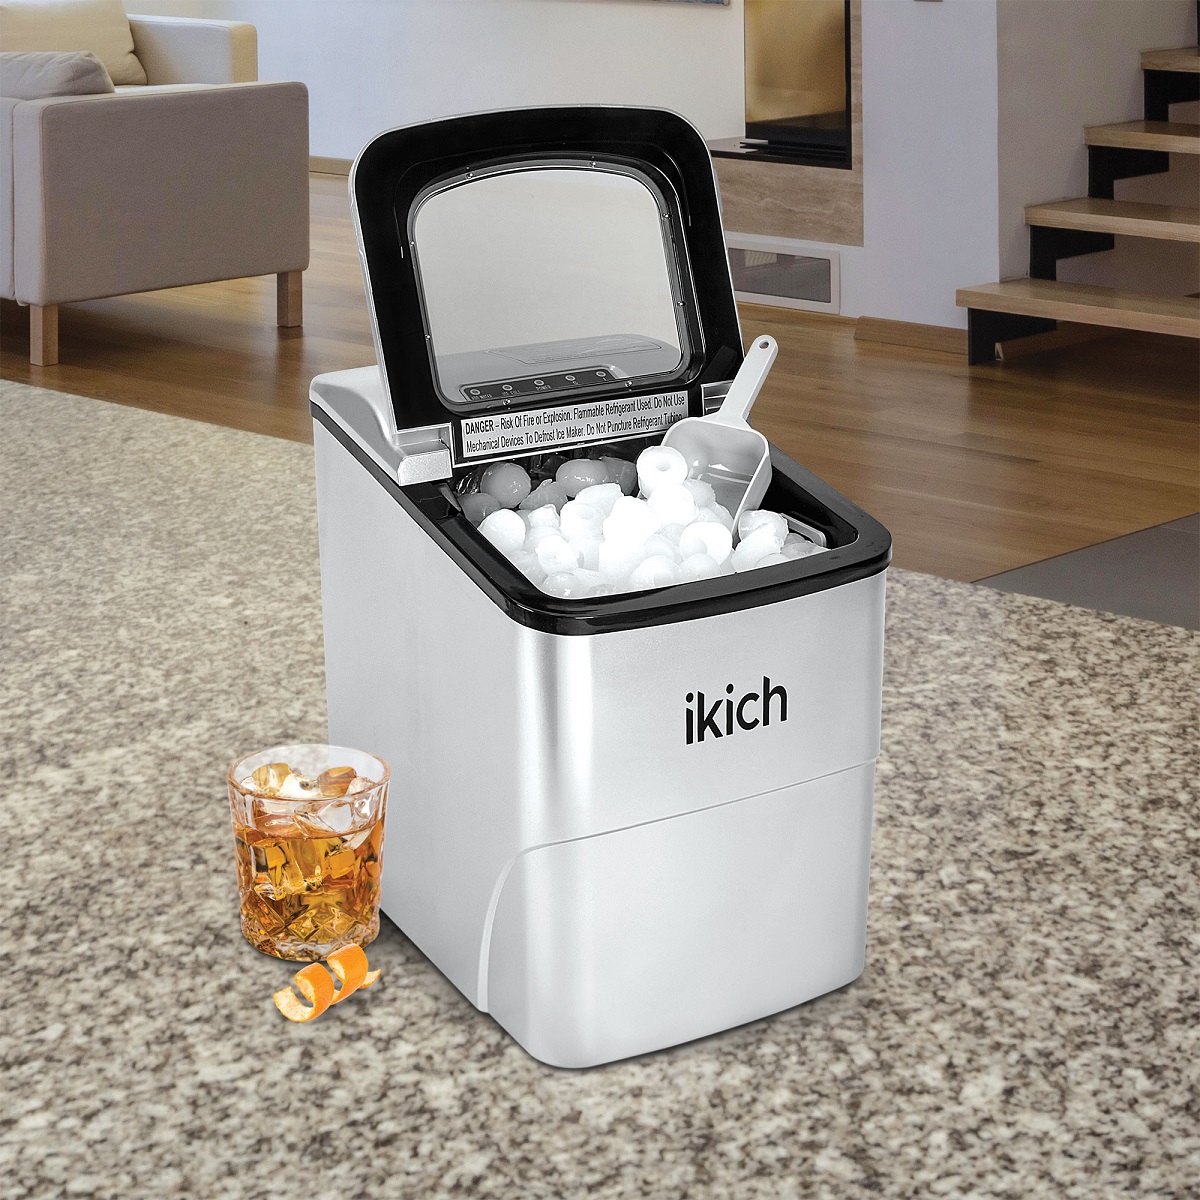 How To Clean An Ikich Ice Maker